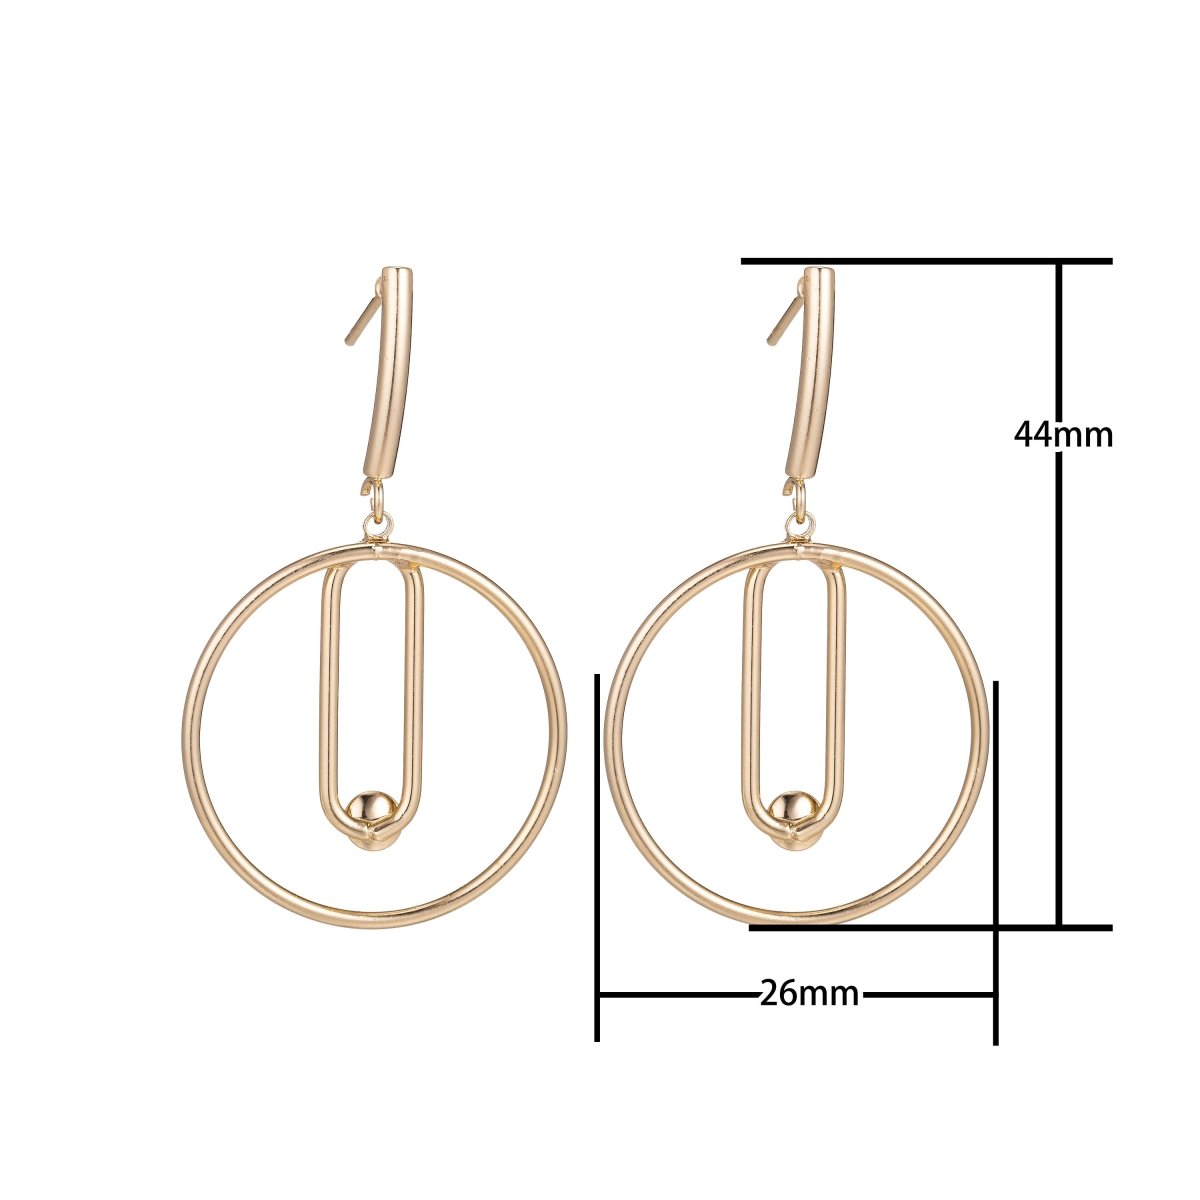 18k Gold Fill DIY Earrings with Loop, Make Your Own Stud Dangle Earrings, Earring Component Findings for Jewelry Making Supplies, K-018 - DLUXCA